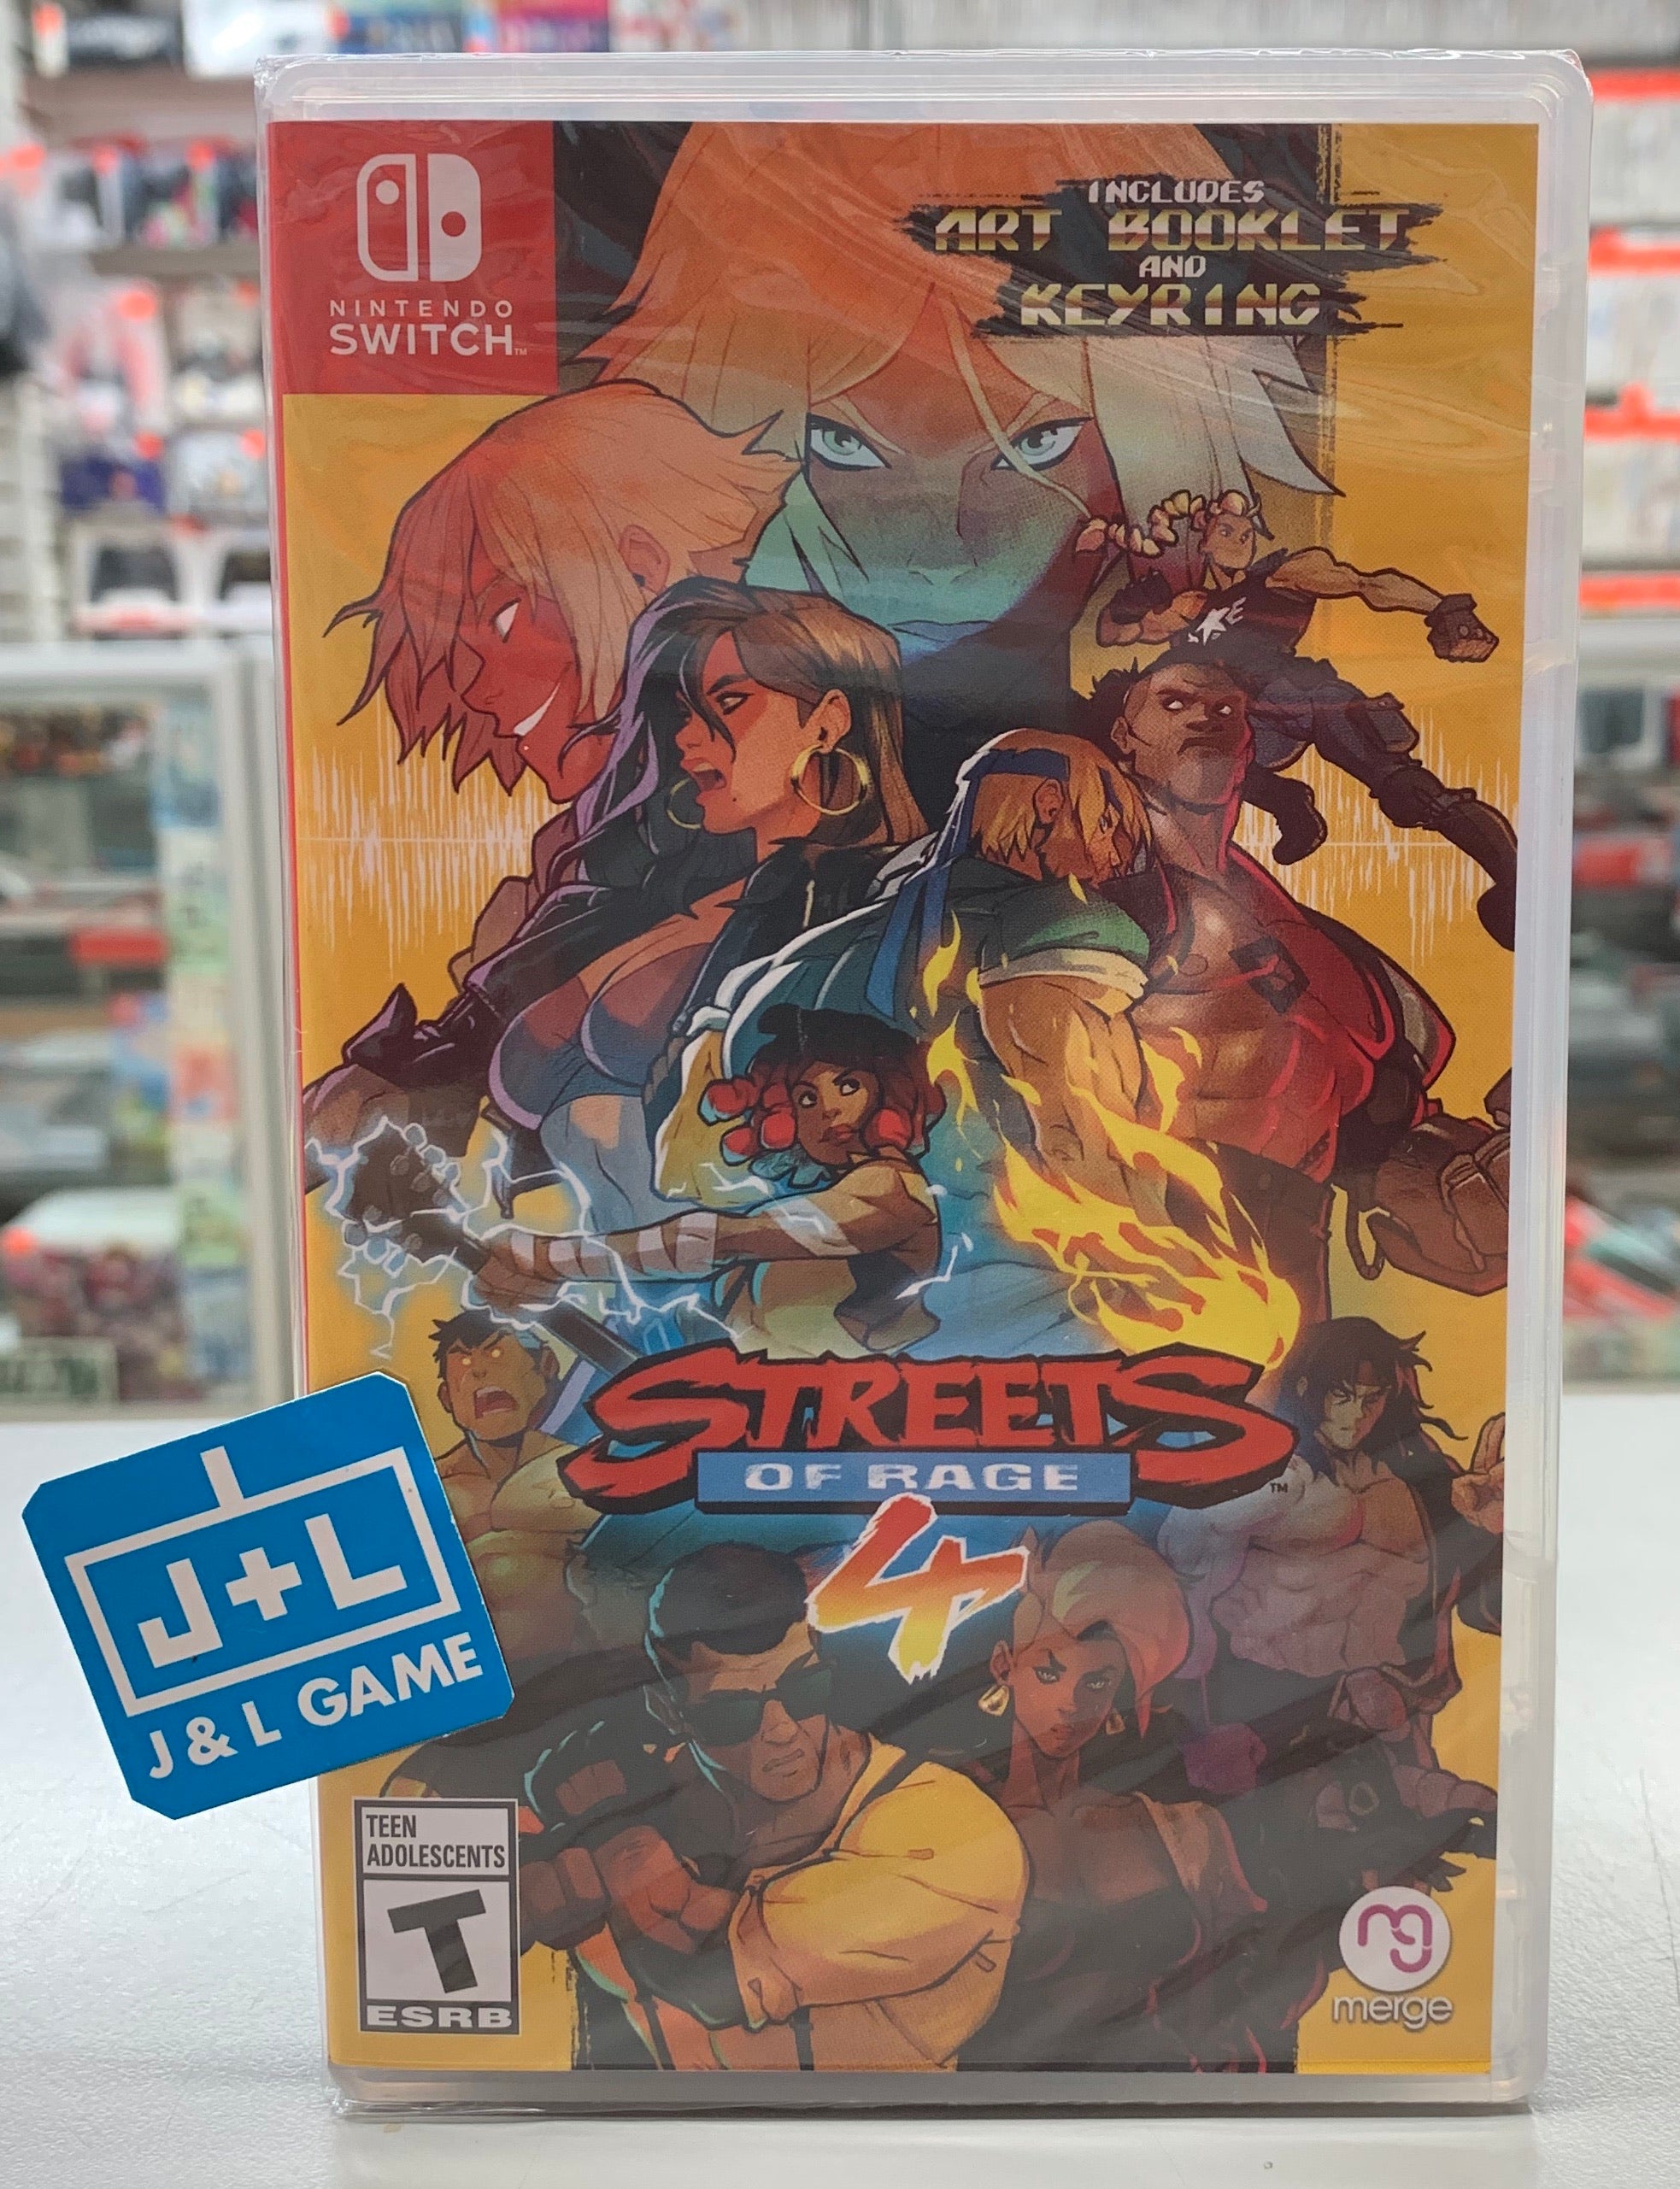 Streets of Rage 4 - (NSW) Nintendo Switch Video Games Merge Games   